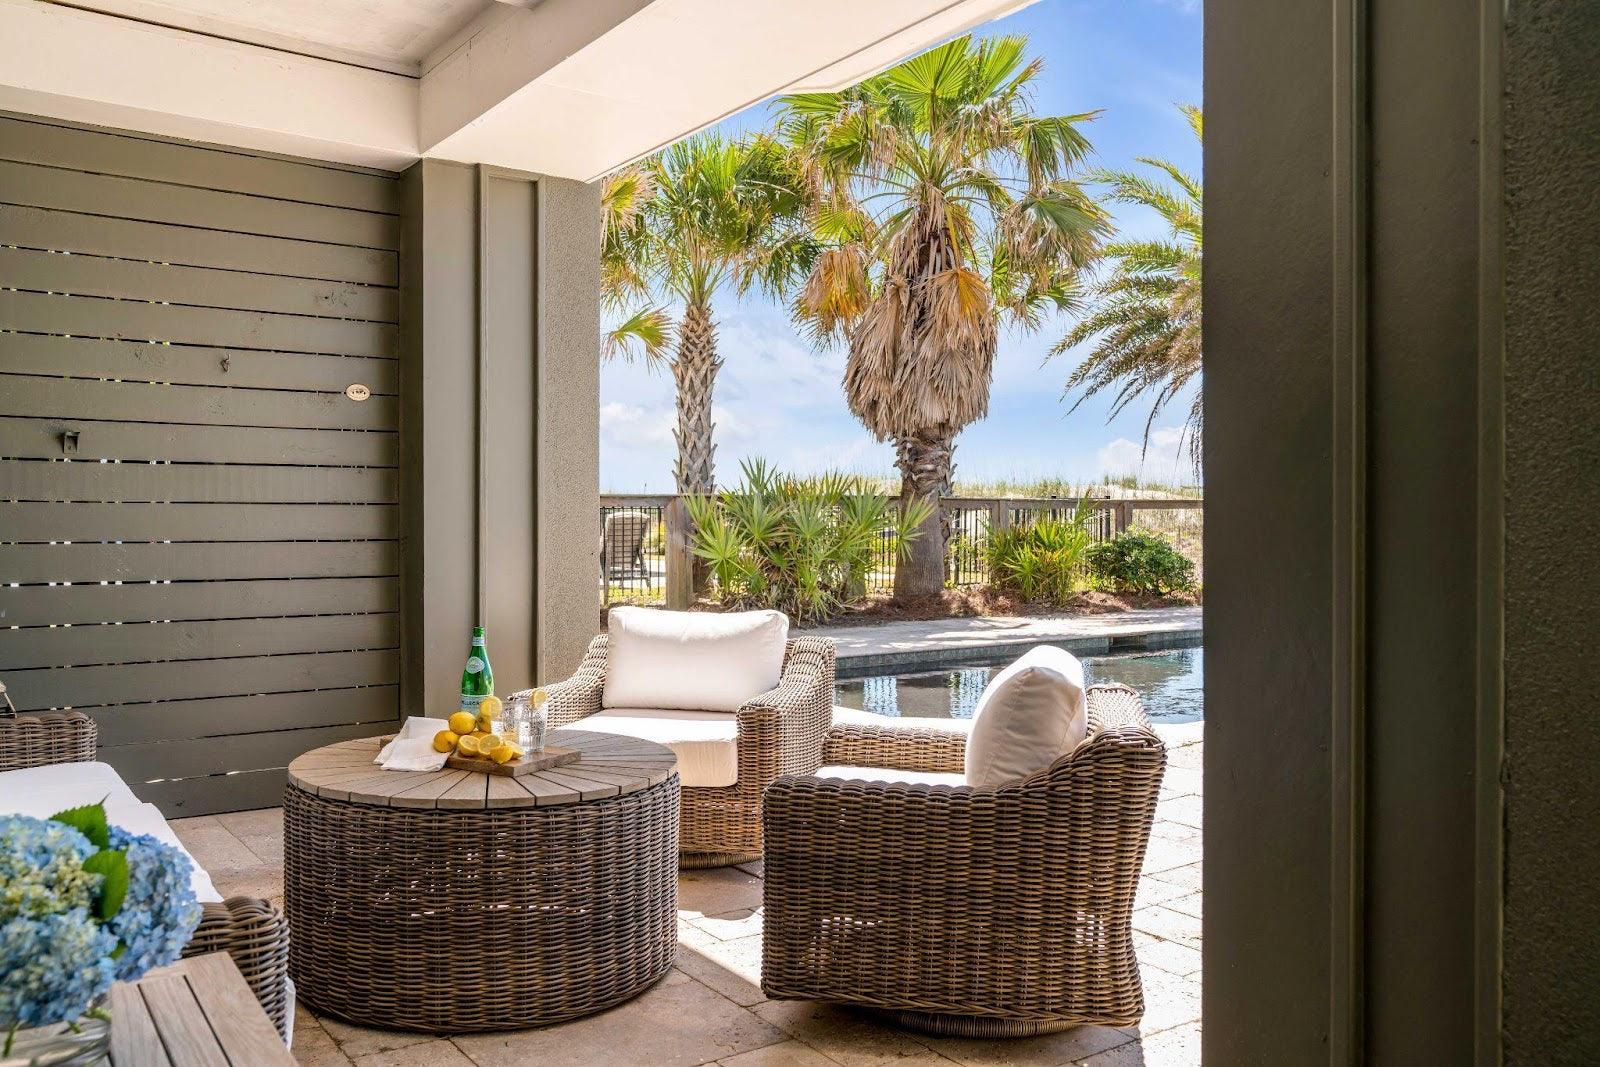 Patio Furniture Buying Guide: What You Need to Know